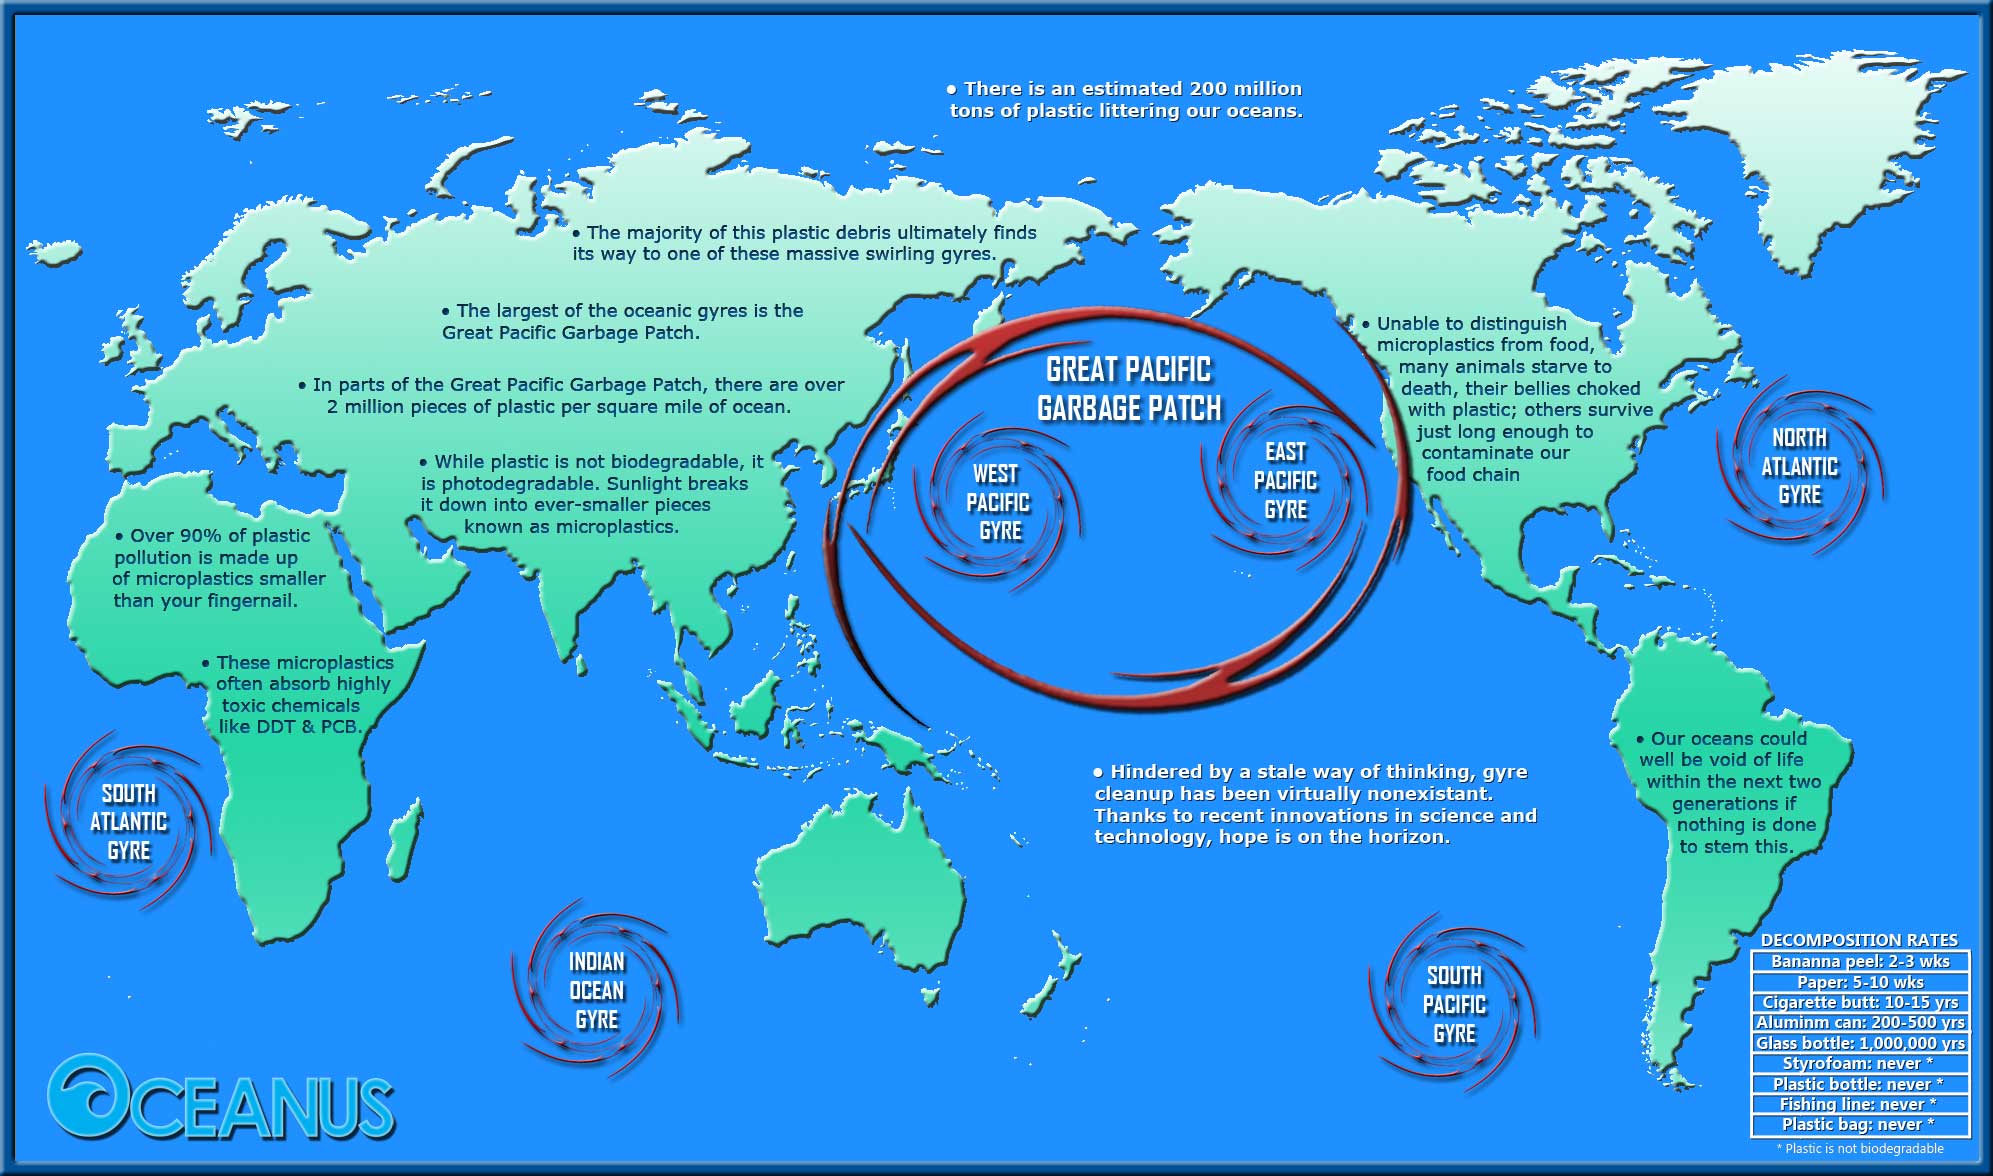 The Great Pacific Garbage Patch – Flash Know